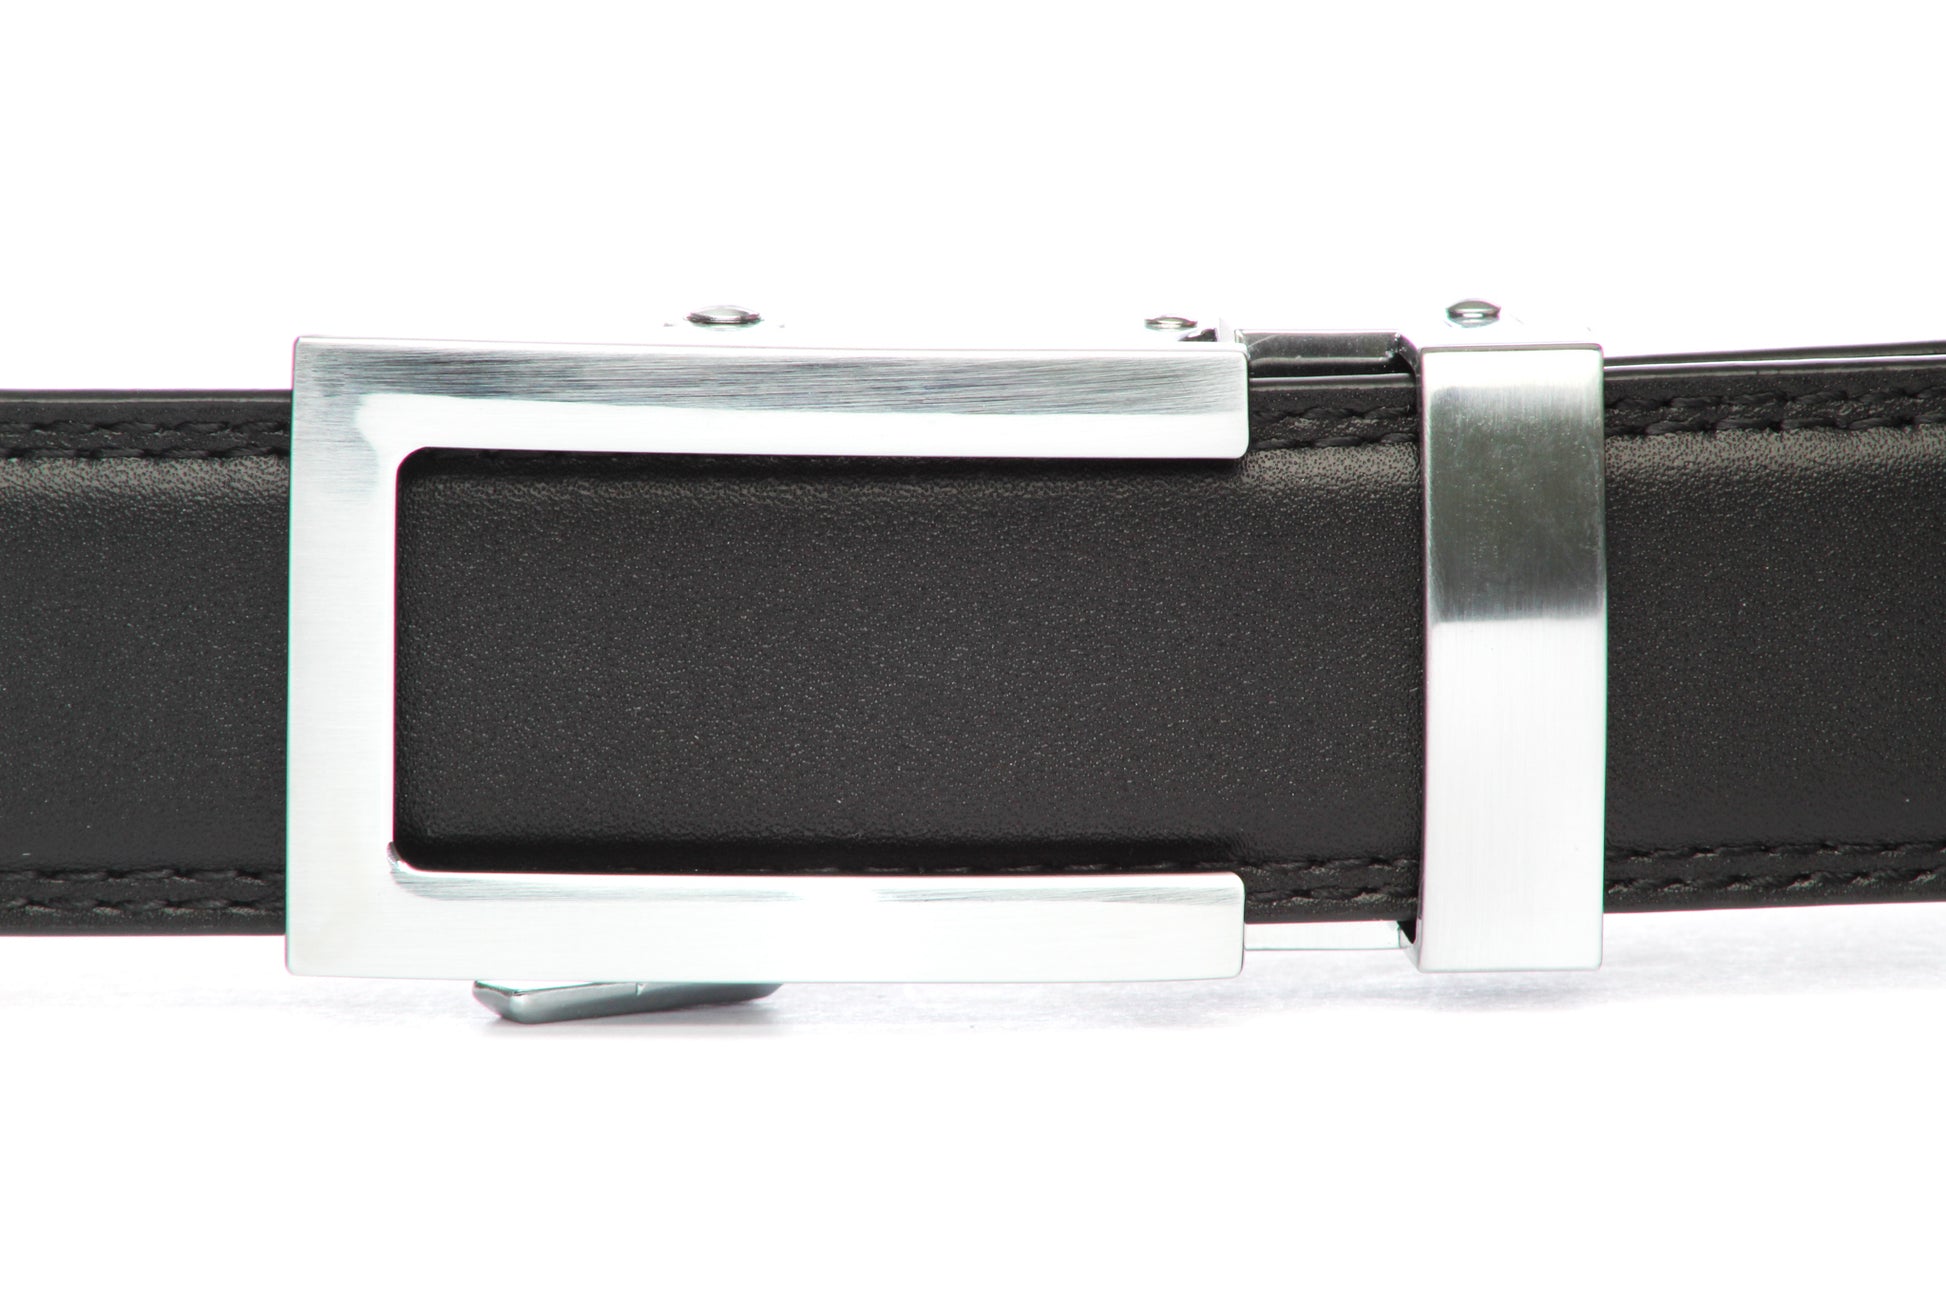 Men's traditional ratchet belt buckle in silver with a 1.25-inch width, front view.